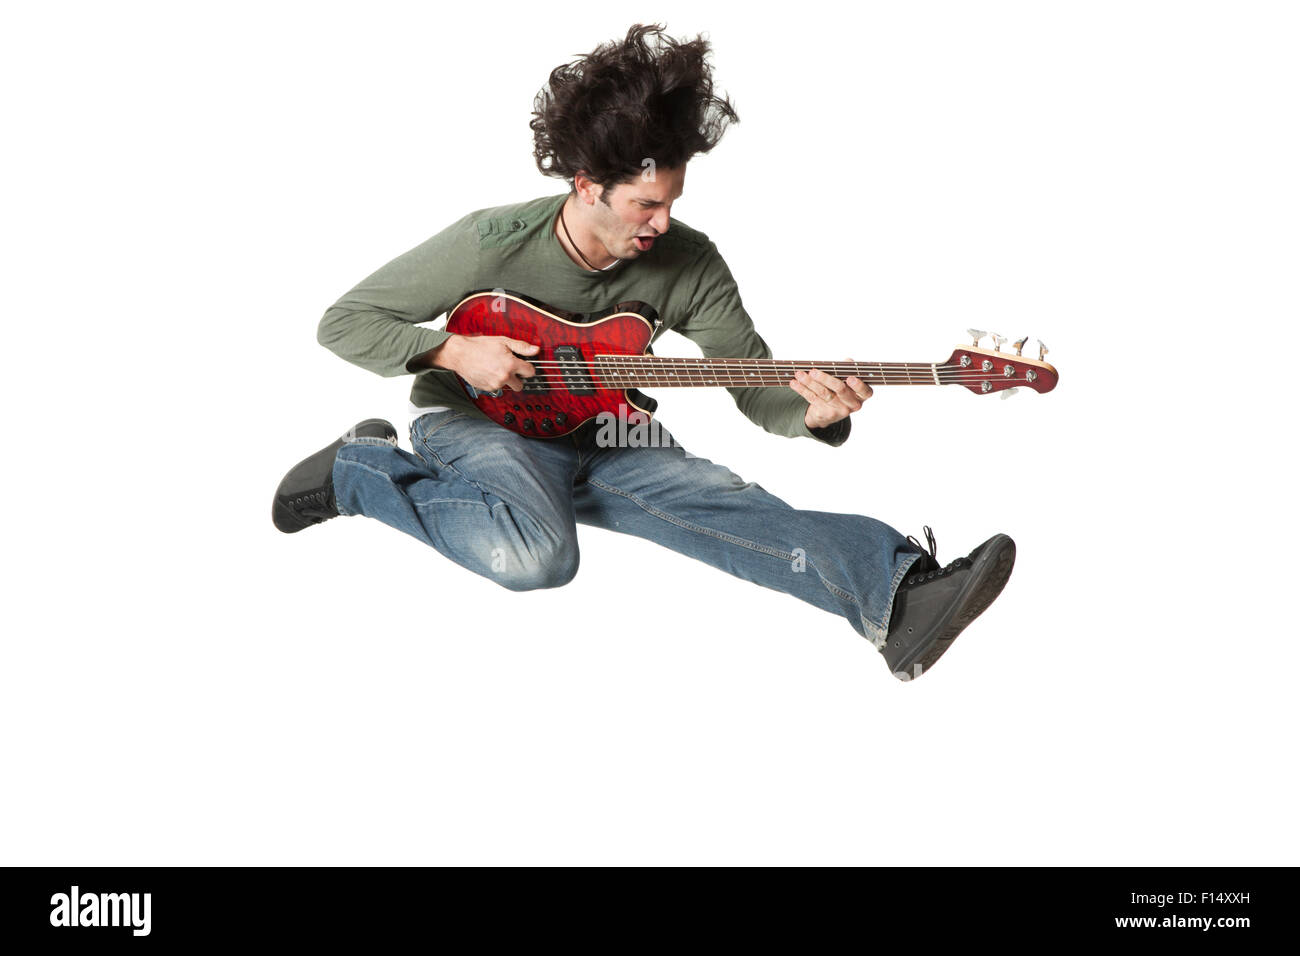 Man jumping in mid-air playing electric guitar Stock Photo